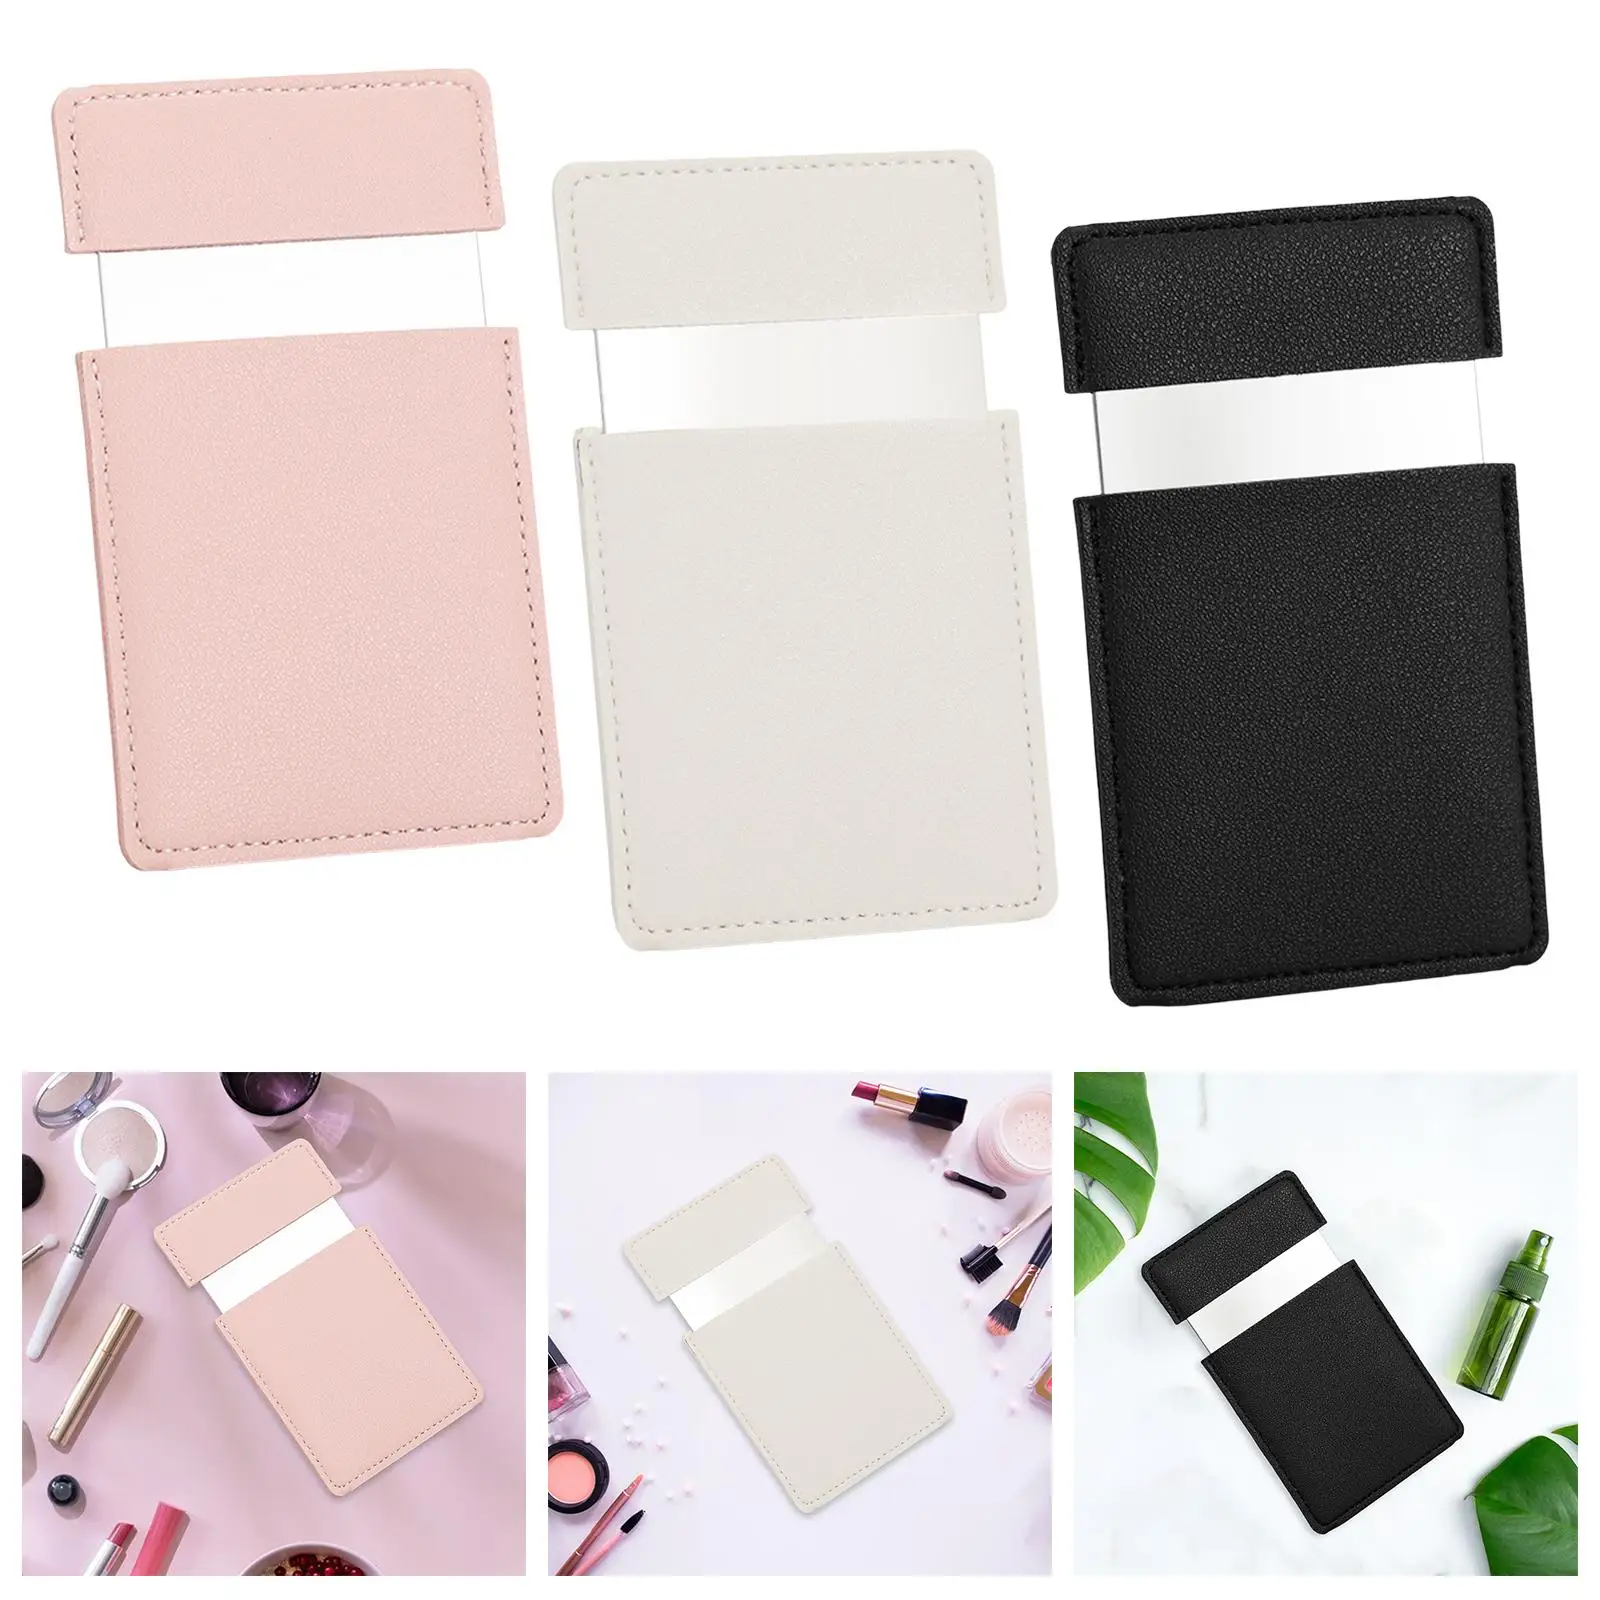 Stainless Steel Square Mirror Travel Size Outdoor Shatterproof Compact Mirror Camping Small Travel Mirror with PU Leather Cover